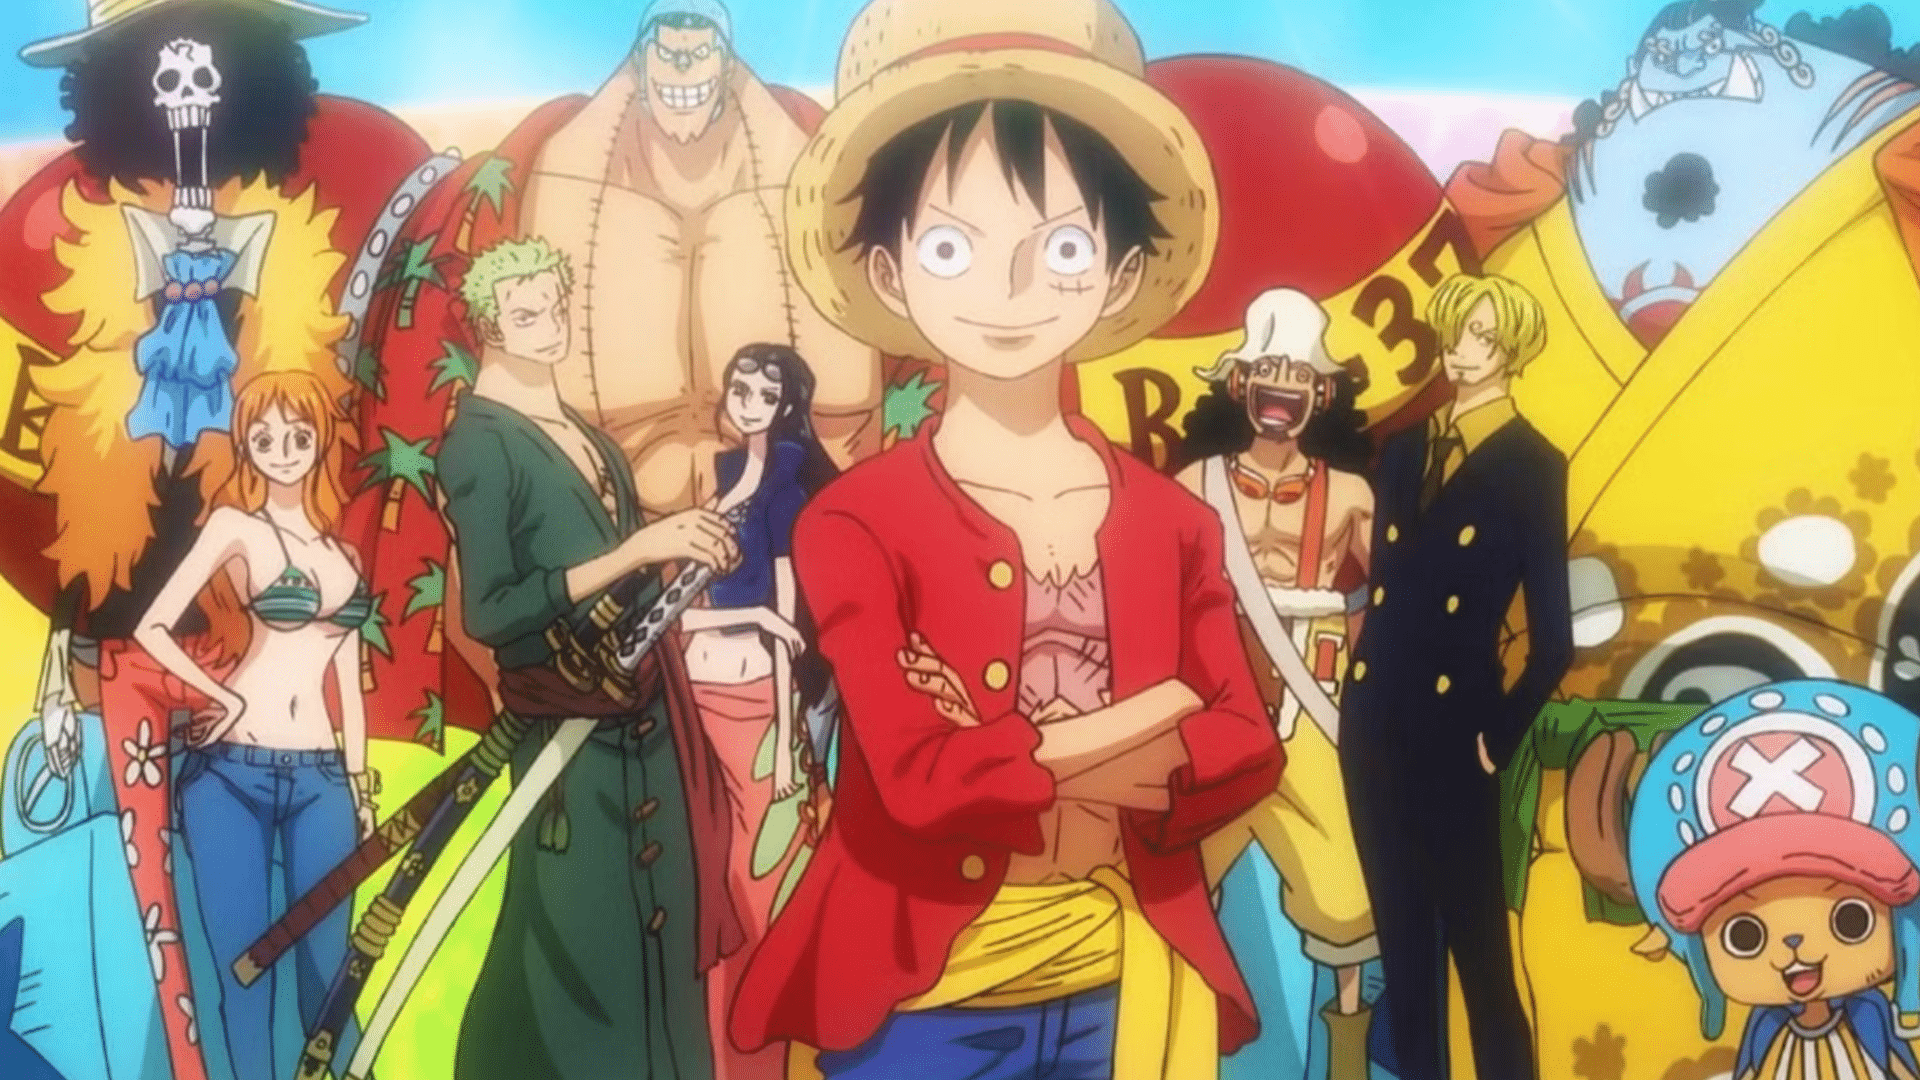 Luffy and his crew members from One Piece